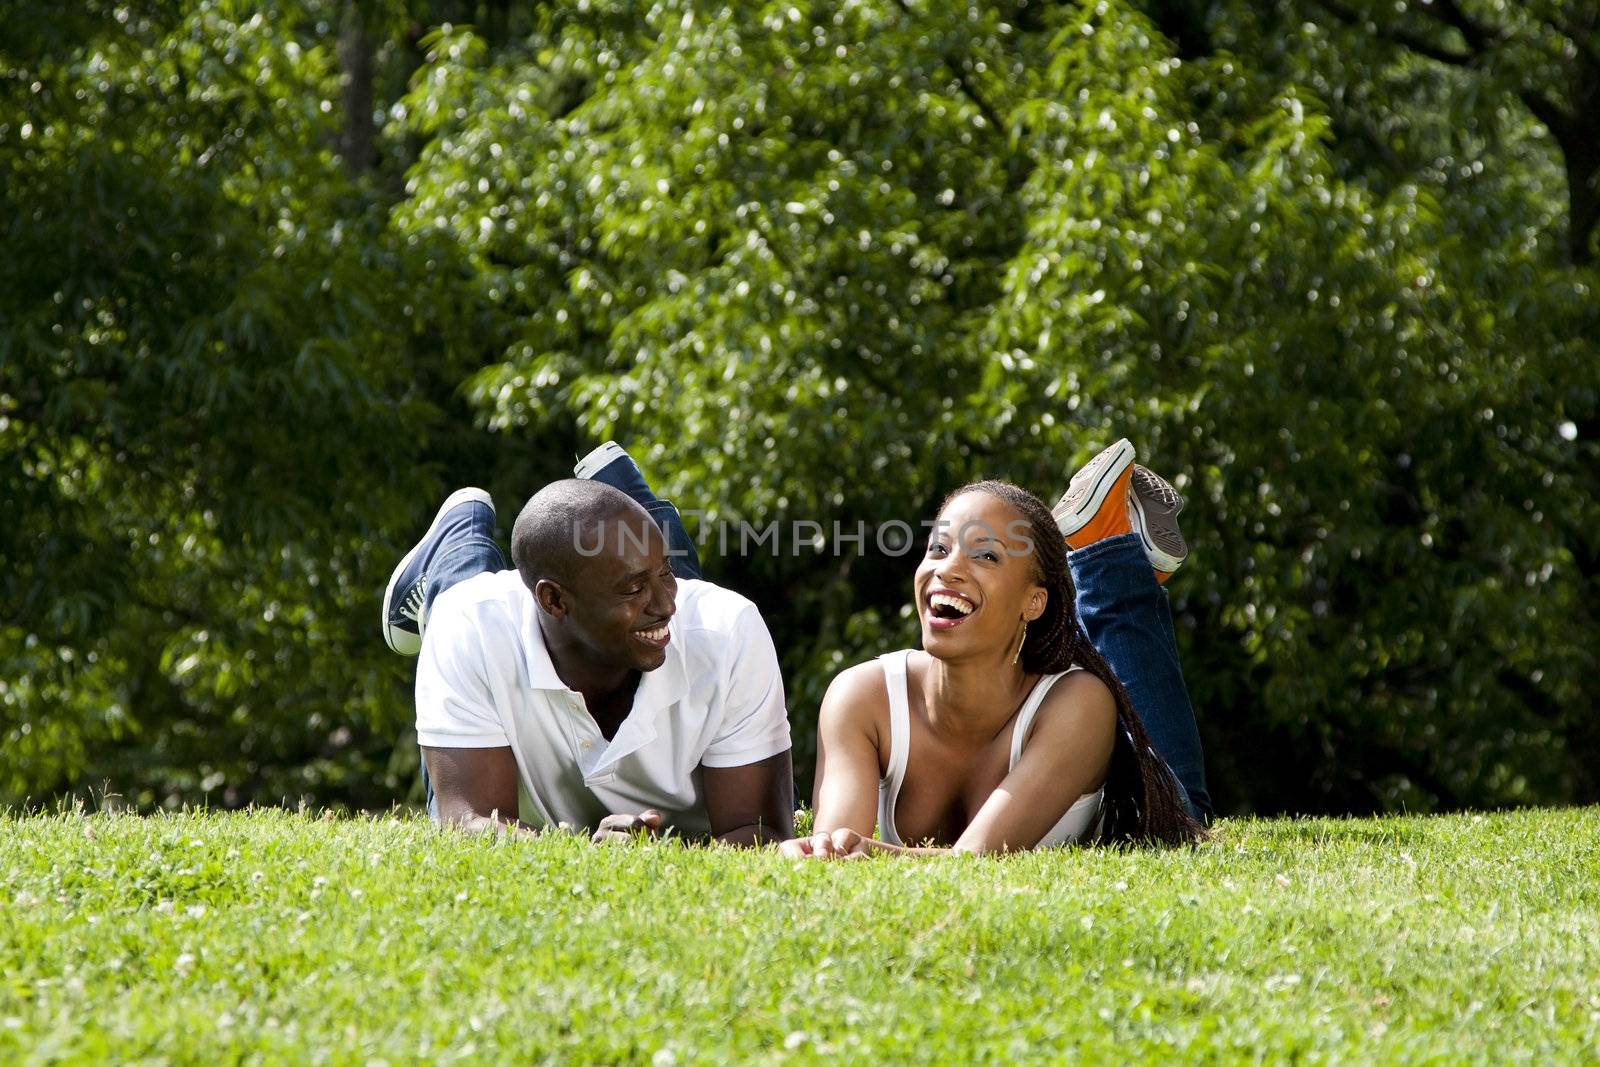 Beautiful fun happy smiling laughing African American couple joking laying on grass in park, wearing white shirts and blue jeans.